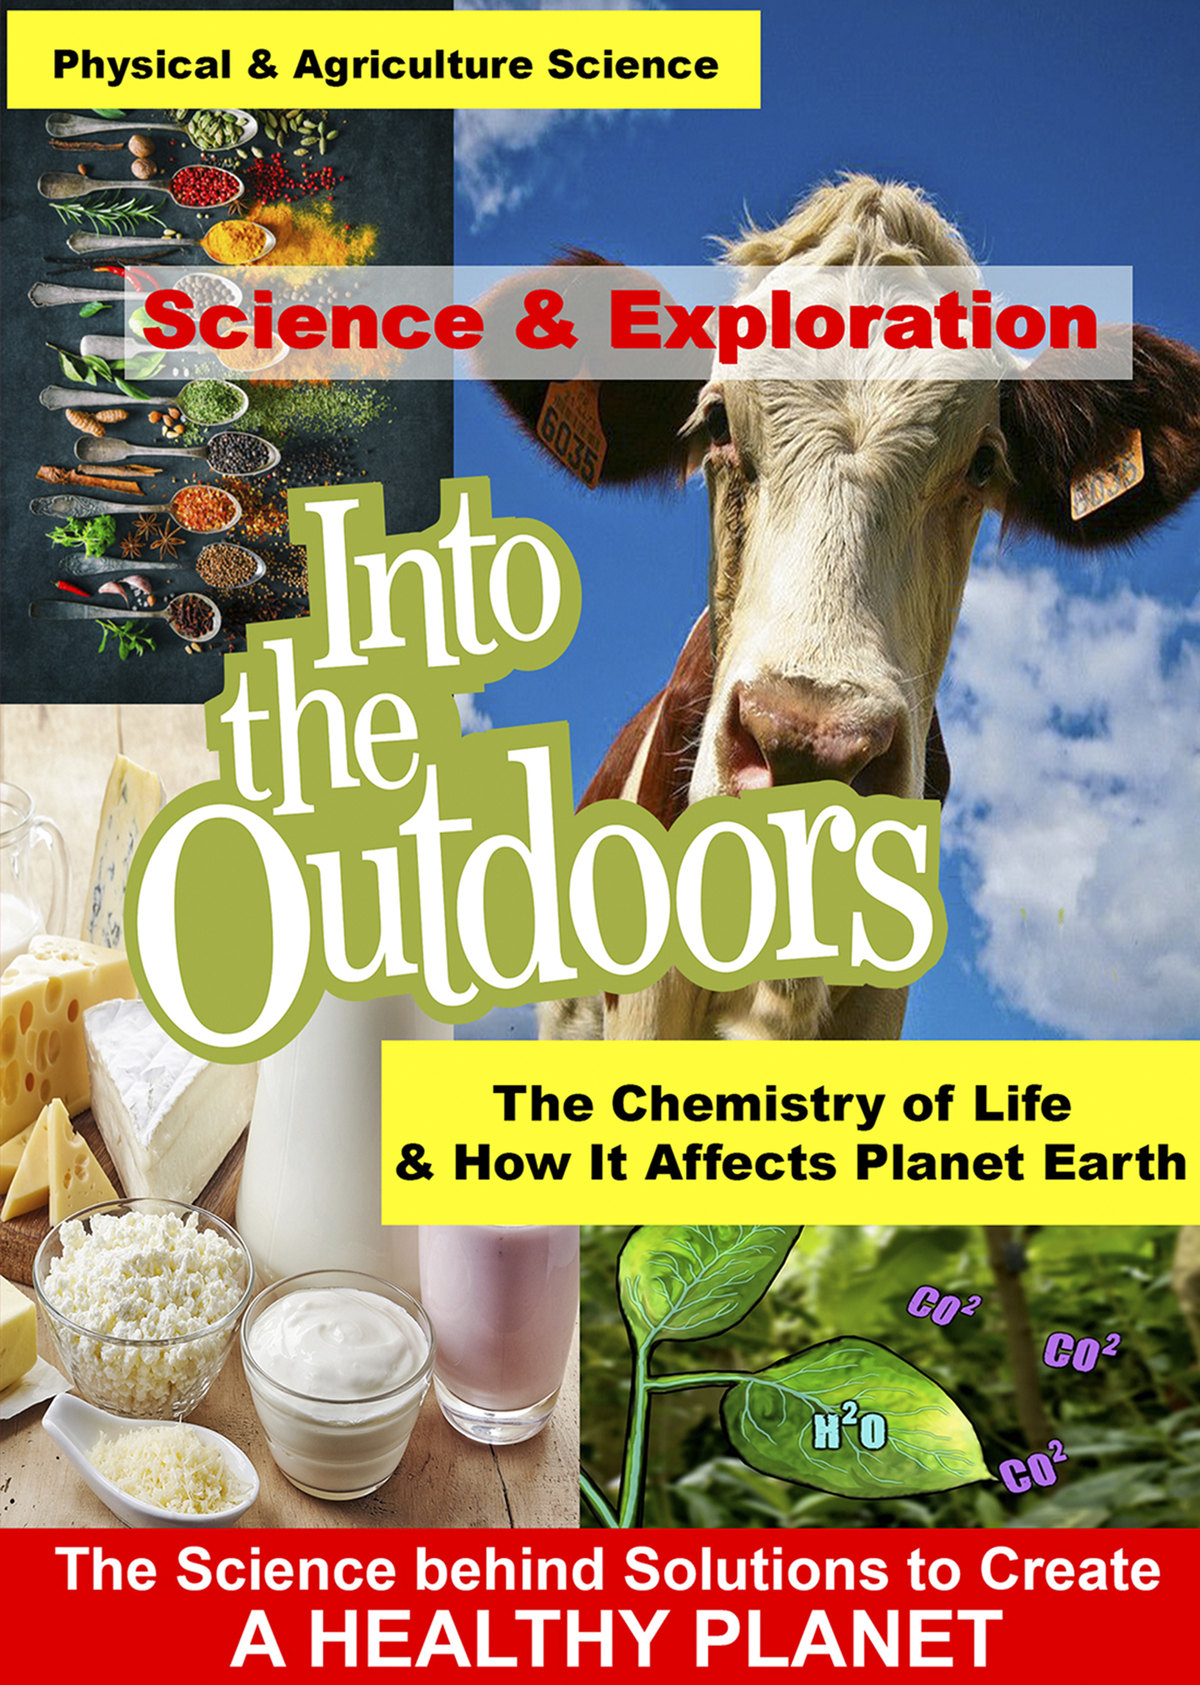 K4993 - The Chemistry of Life & How it Affects Everything on Planet Earth